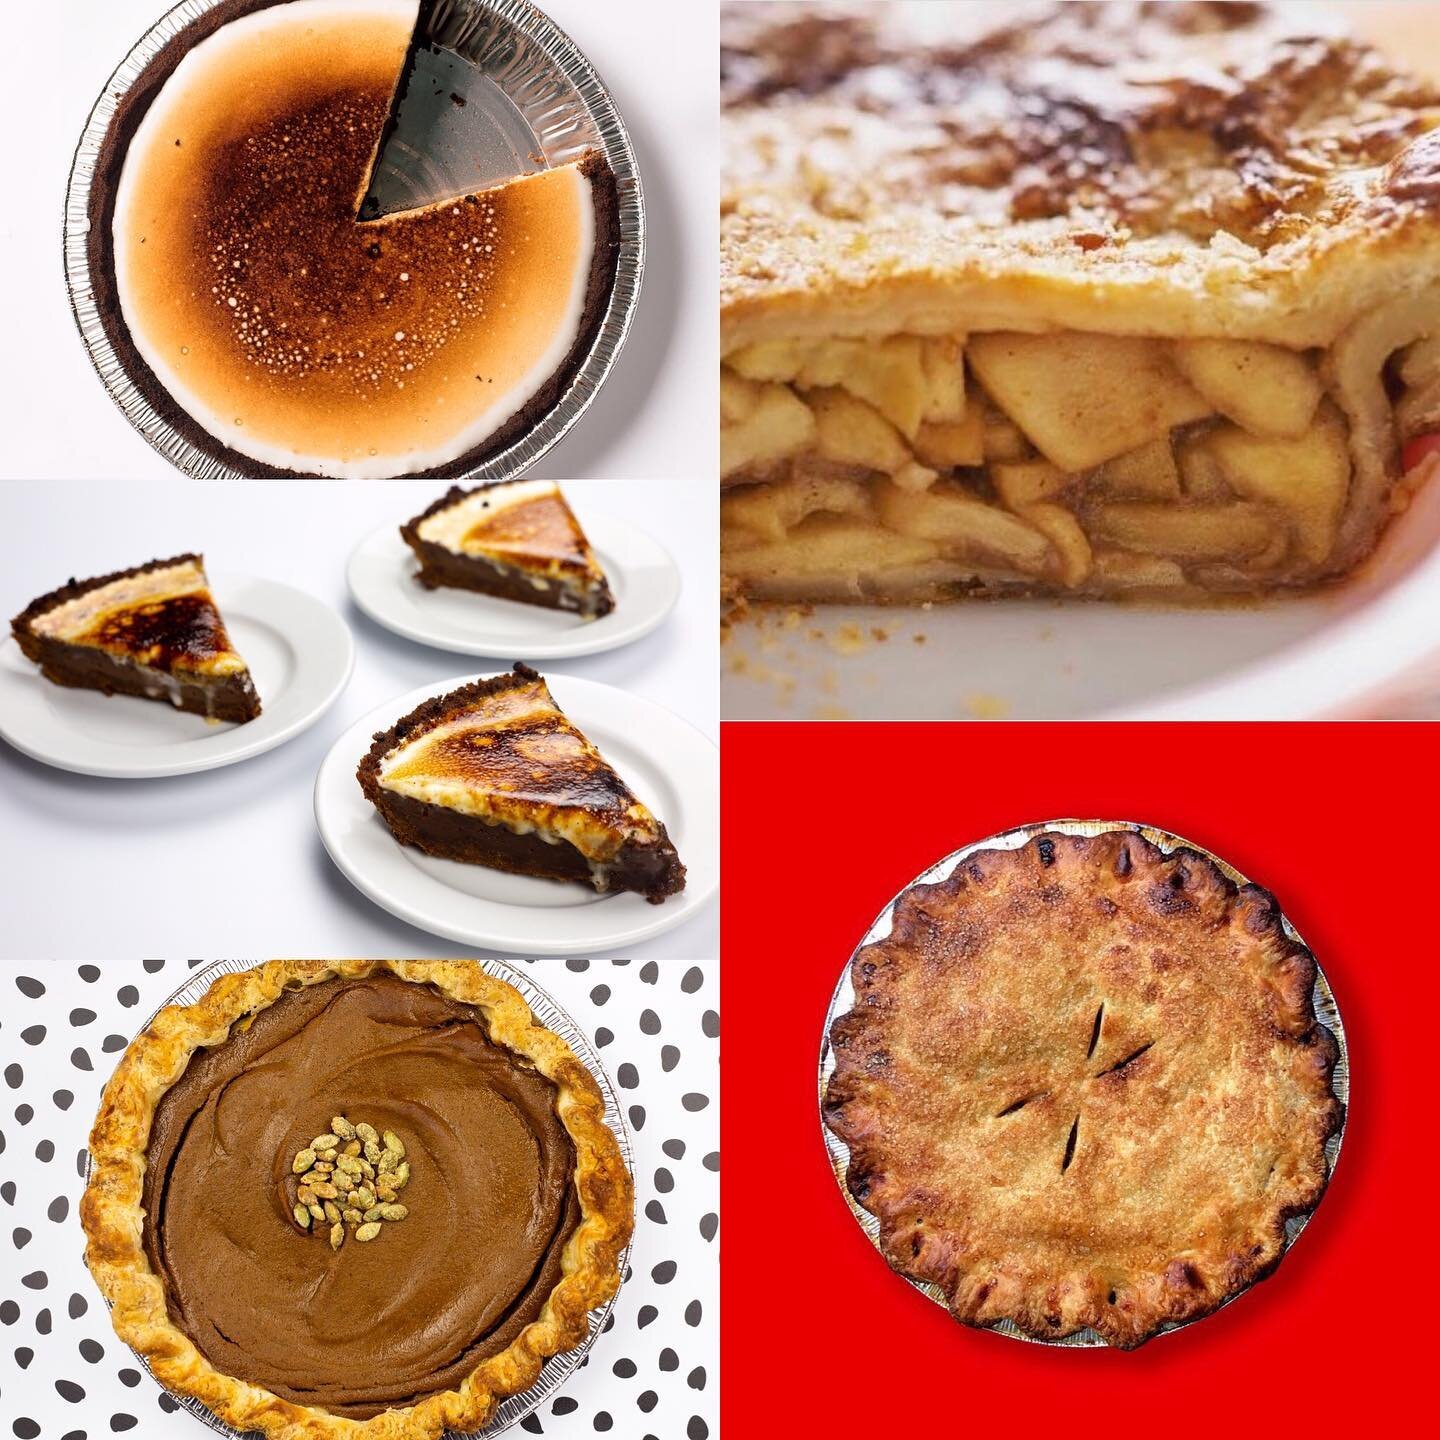 Thanksgiving is next week! 
Pre-orders for these delicious pies from @drunkbakers are now available. Stop by the store or give us a call to reserve yours!
Flavors this year are...
Caramel Apple
S&rsquo;mores 
Spiced Pumpkin
Cranberry, Apple, and Pear